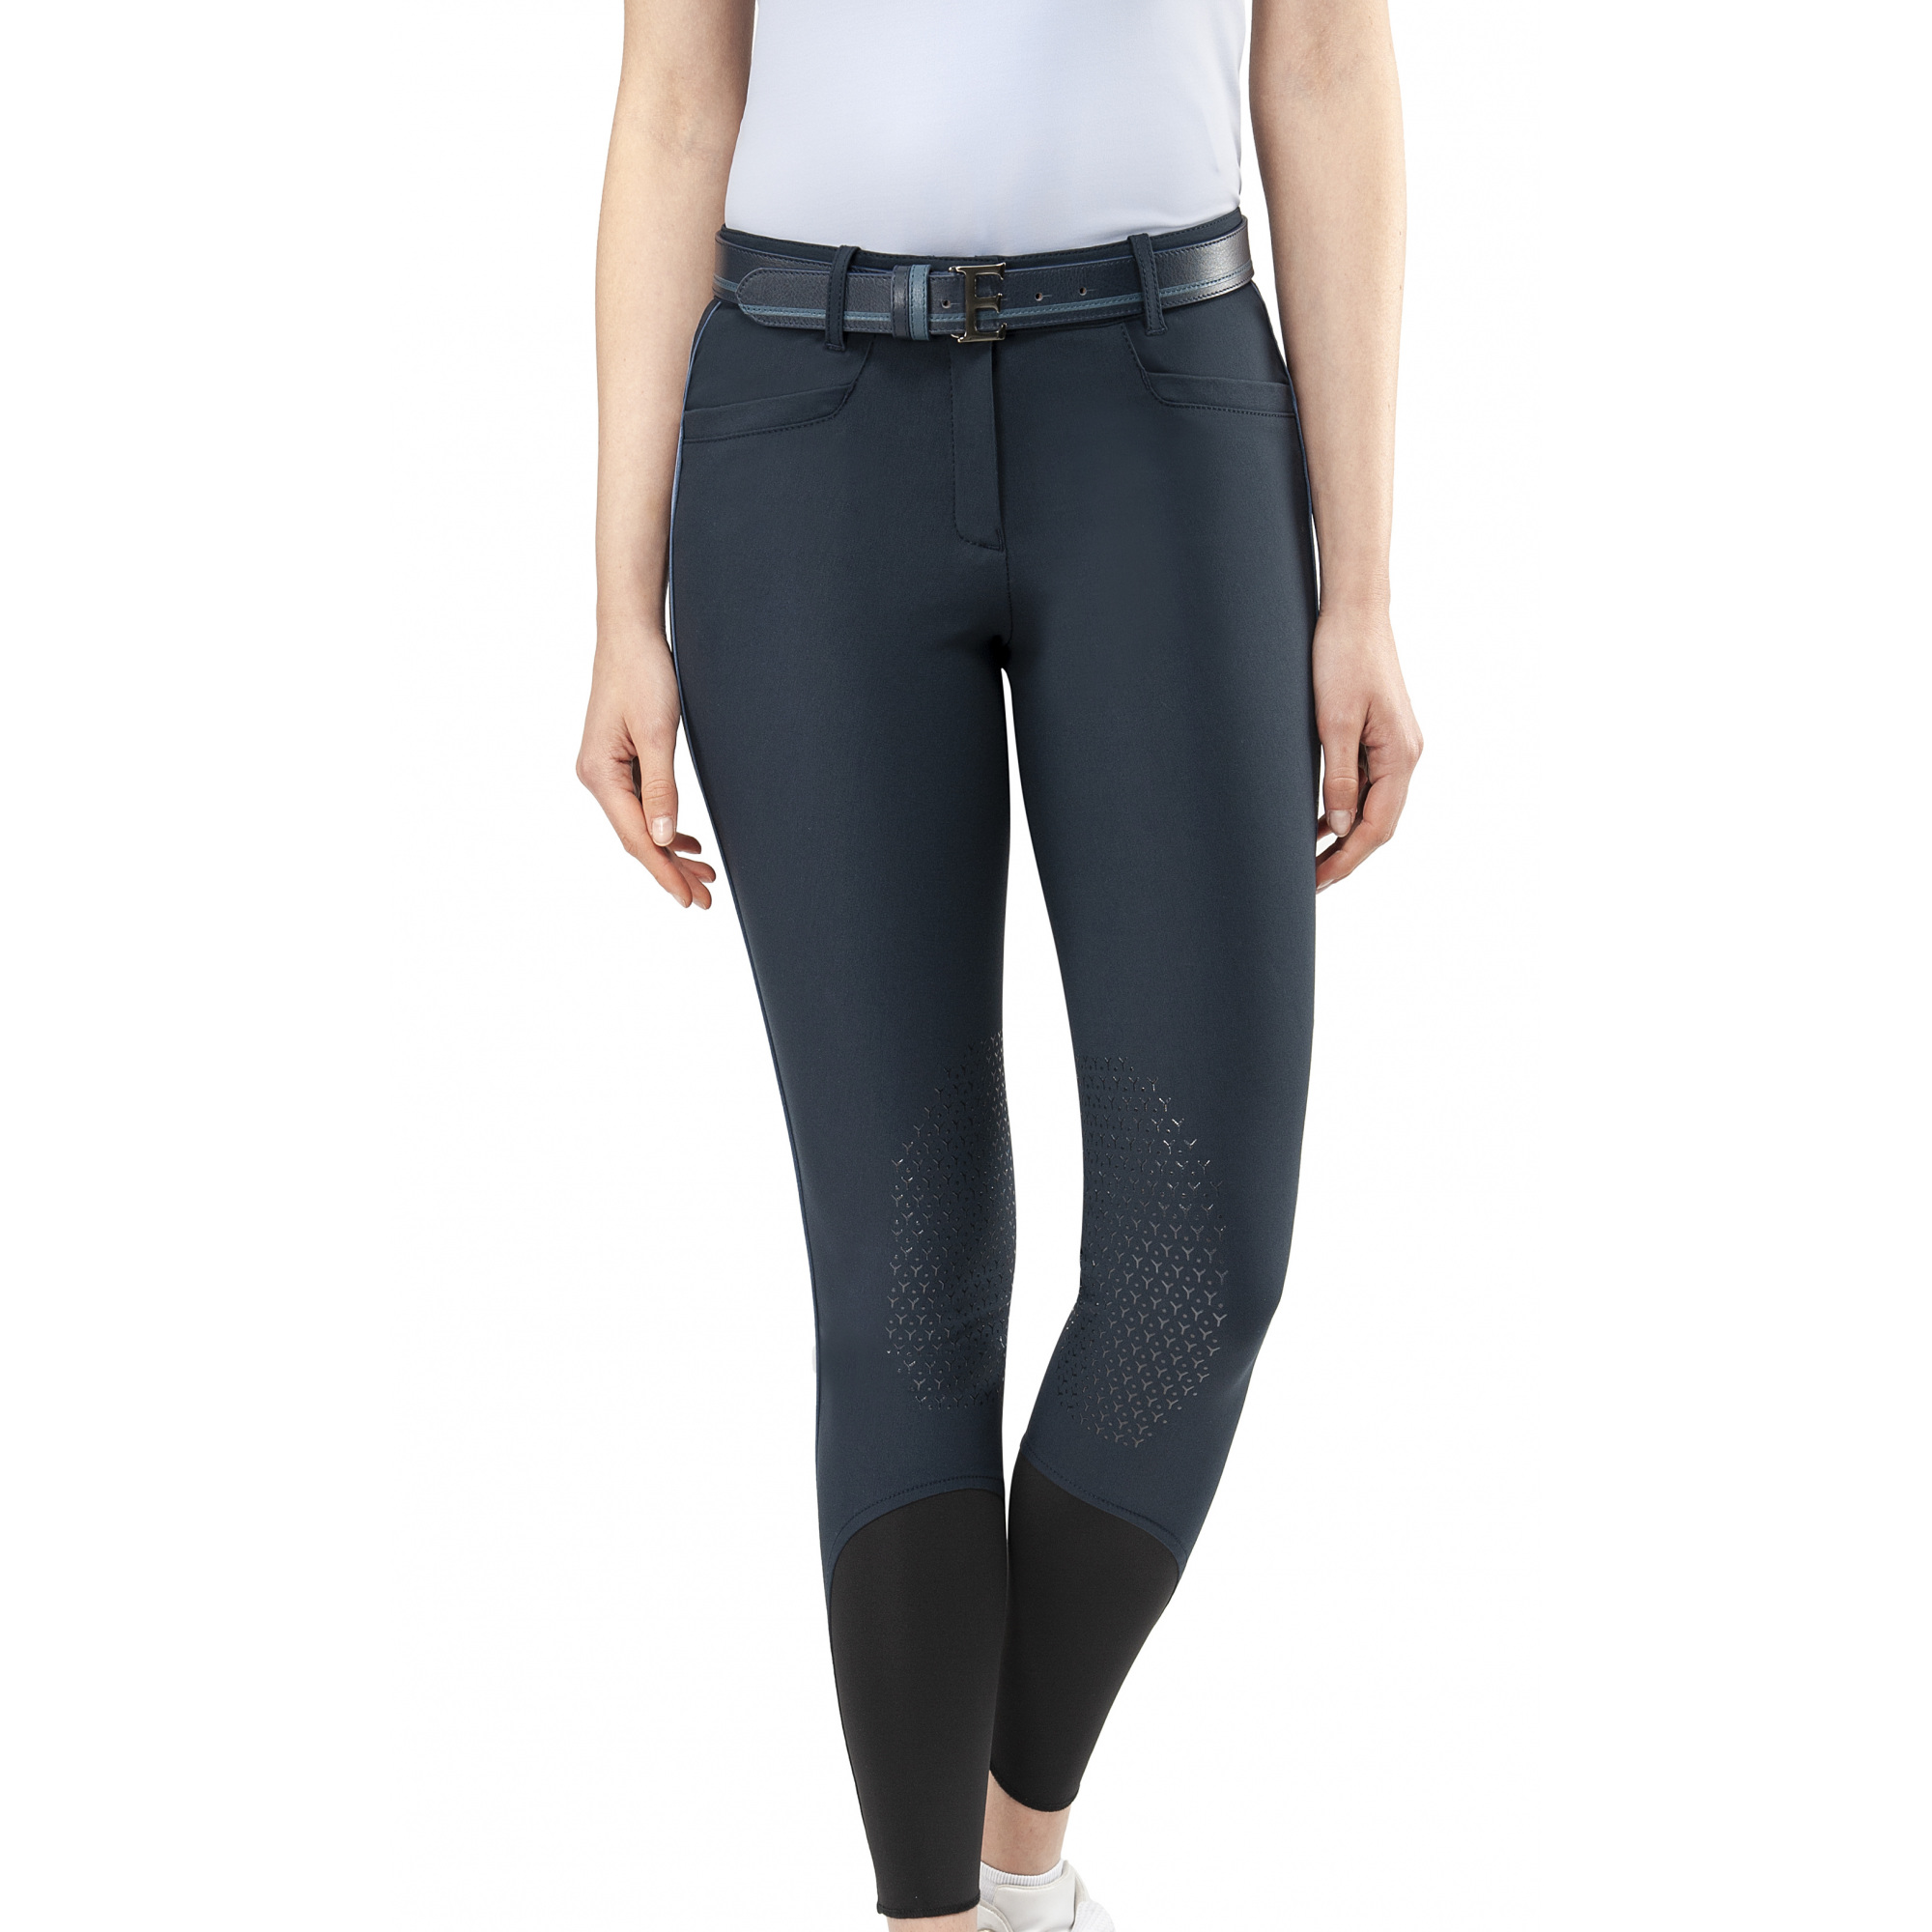 EQUILINE ETHEREAL WOMEN'S KNEE GRIP BREECHES - EQUISHOP Equestrian Shop